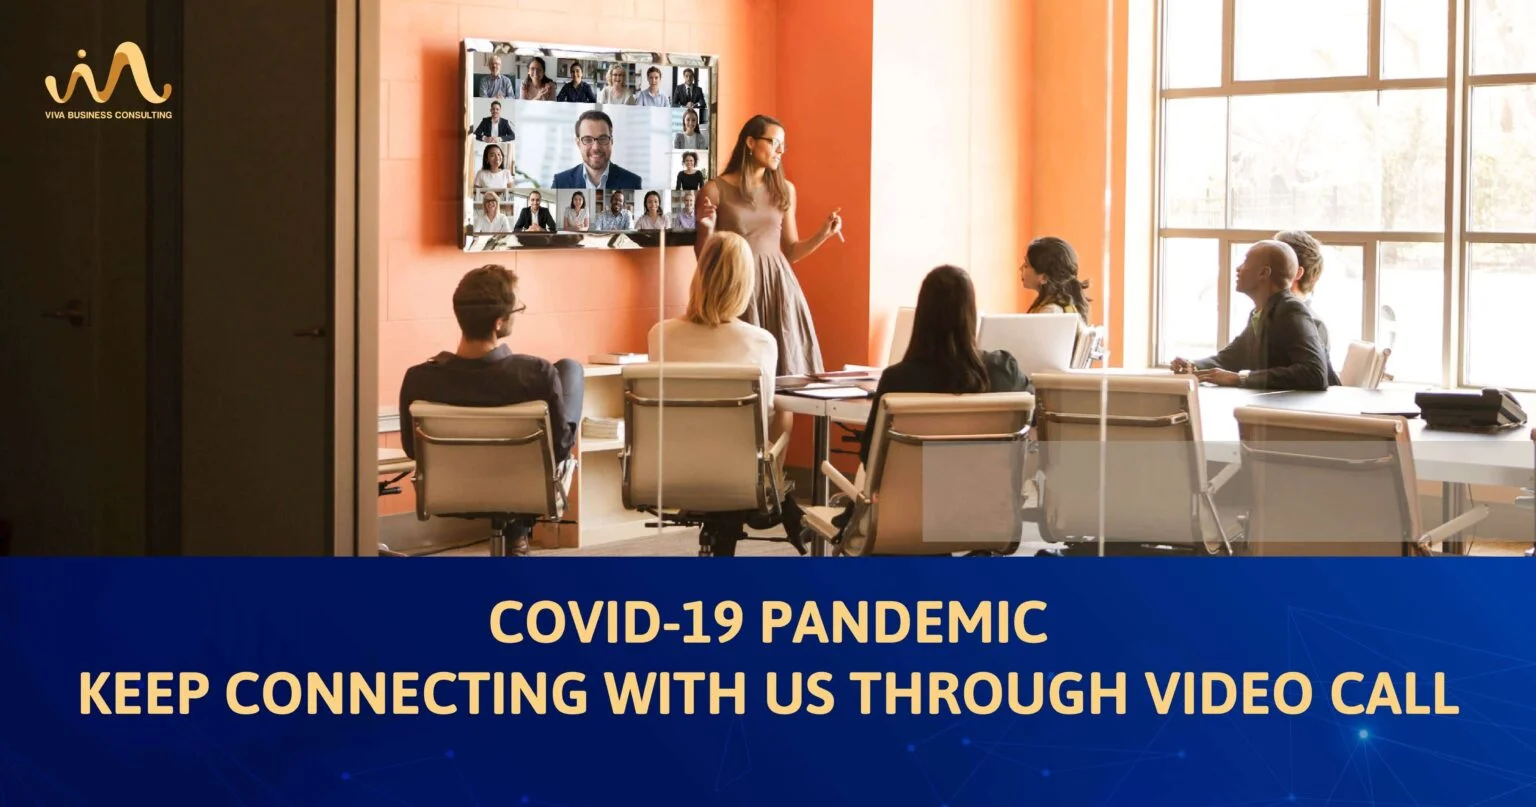 Covid-19 Pandemic, keep connecting with us through video call